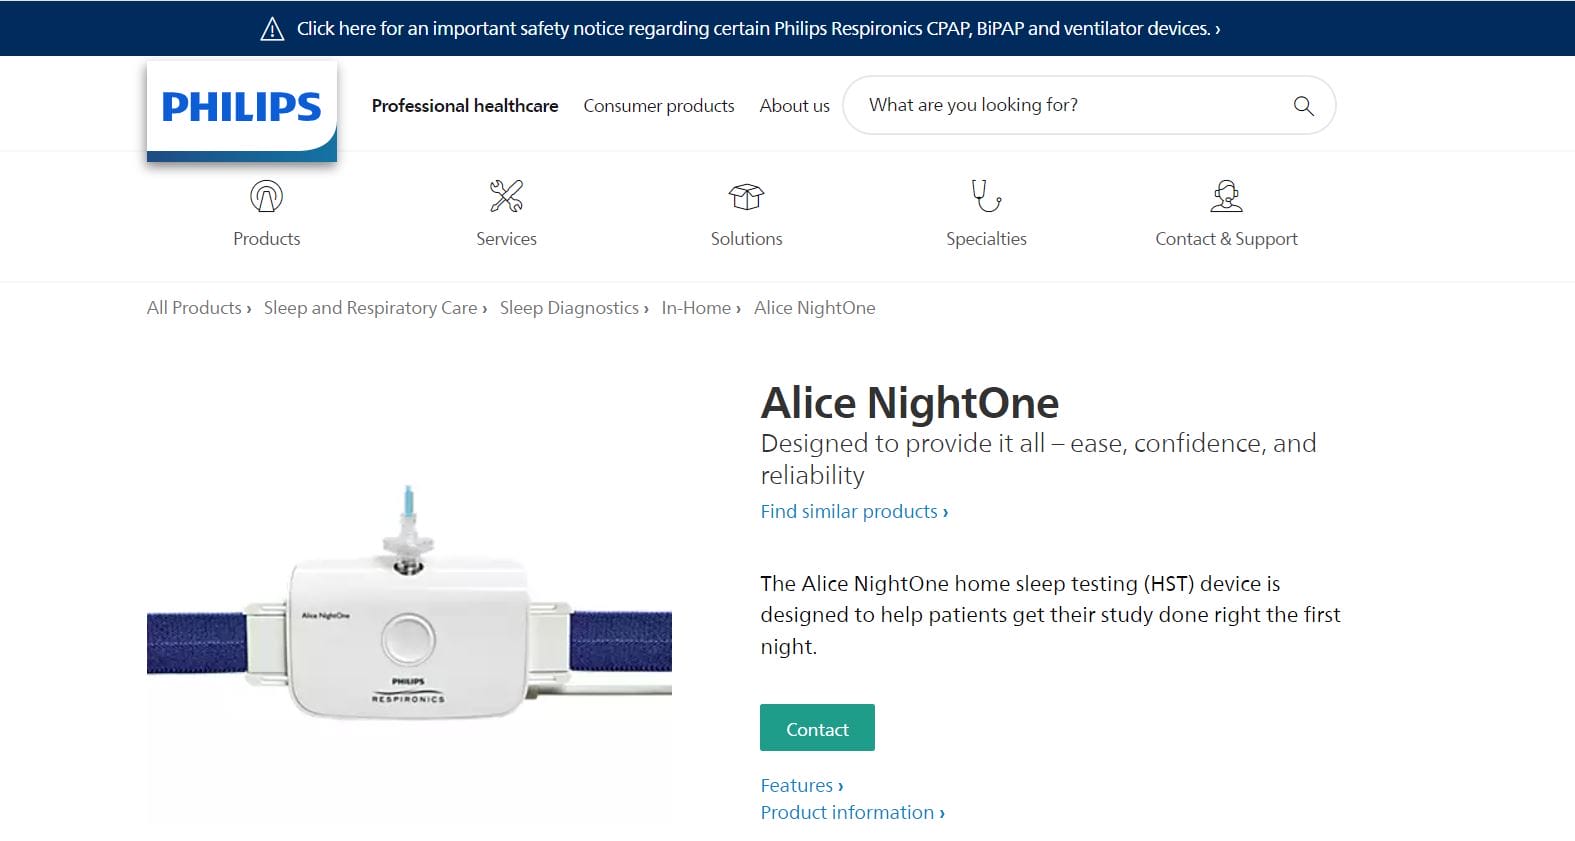 A webpage from Philips showcasing the Alice NightOne sleep testing device, which is designed to help patients test their sleep within the comfort of their home. The device includes straps and a sensor.